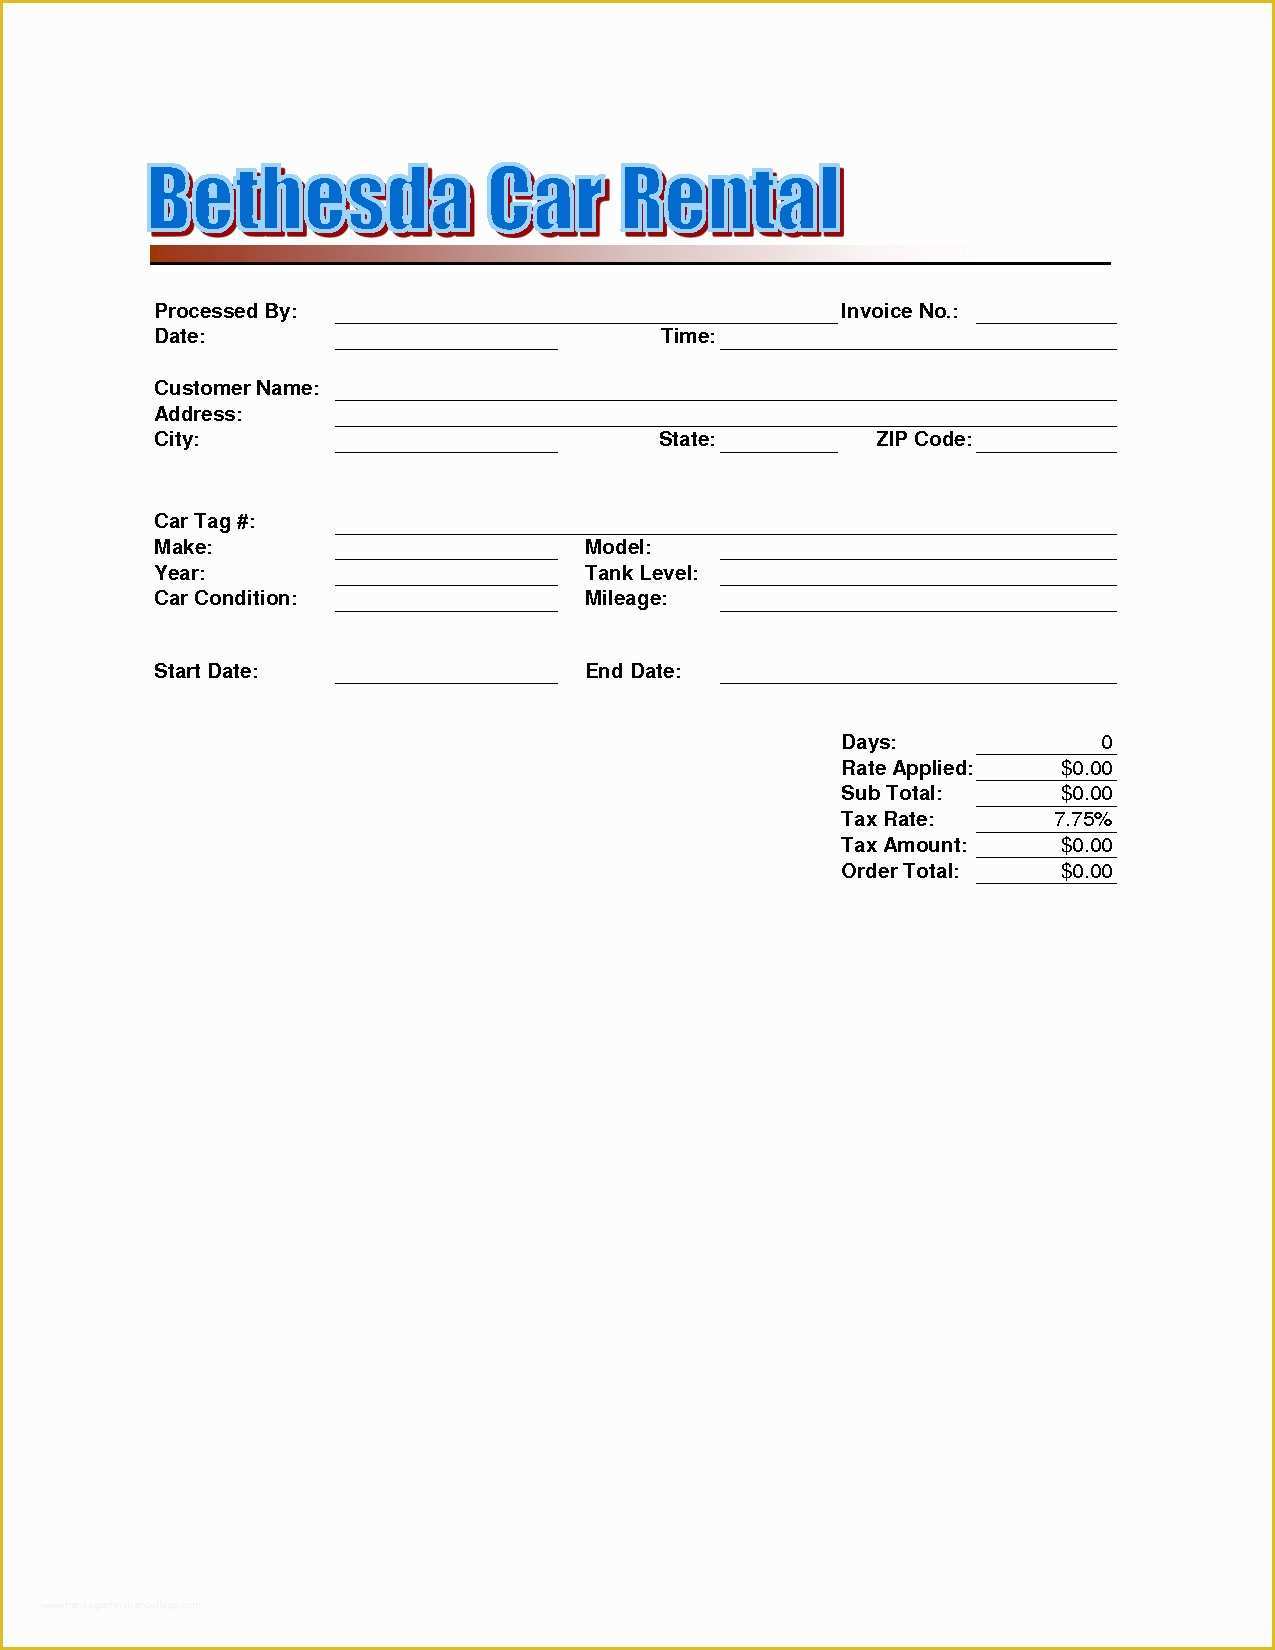 Free Car Rental Invoice Template Excel Of Car Rental Invoicepyj Resume Templates Rent Template Free